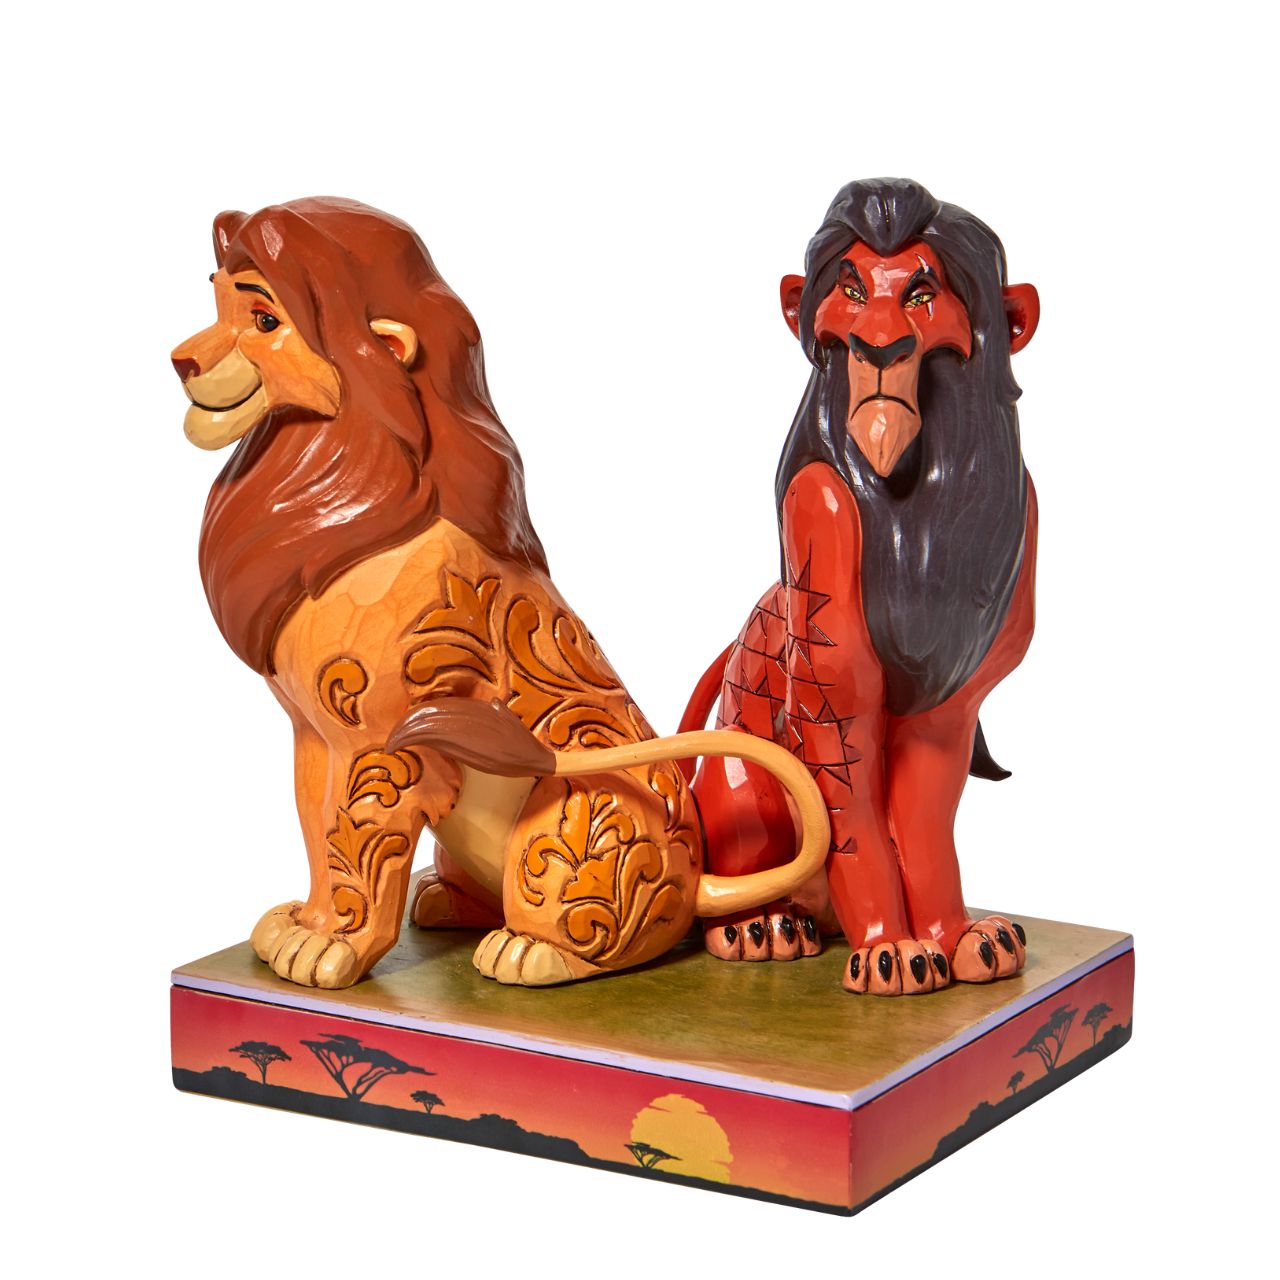 The Lion King Simba & Scar Figurine "Proud and Petulant" by Jim Shore  "Proud and Petulant" This Jim Shore piece ventures into the African savanna to share a scene of good and evil. Striking a winning pose, Simba, the rightful king, smiles next to his murderous uncle, Scar. The pair of lions make a daring duo of strength and pride.